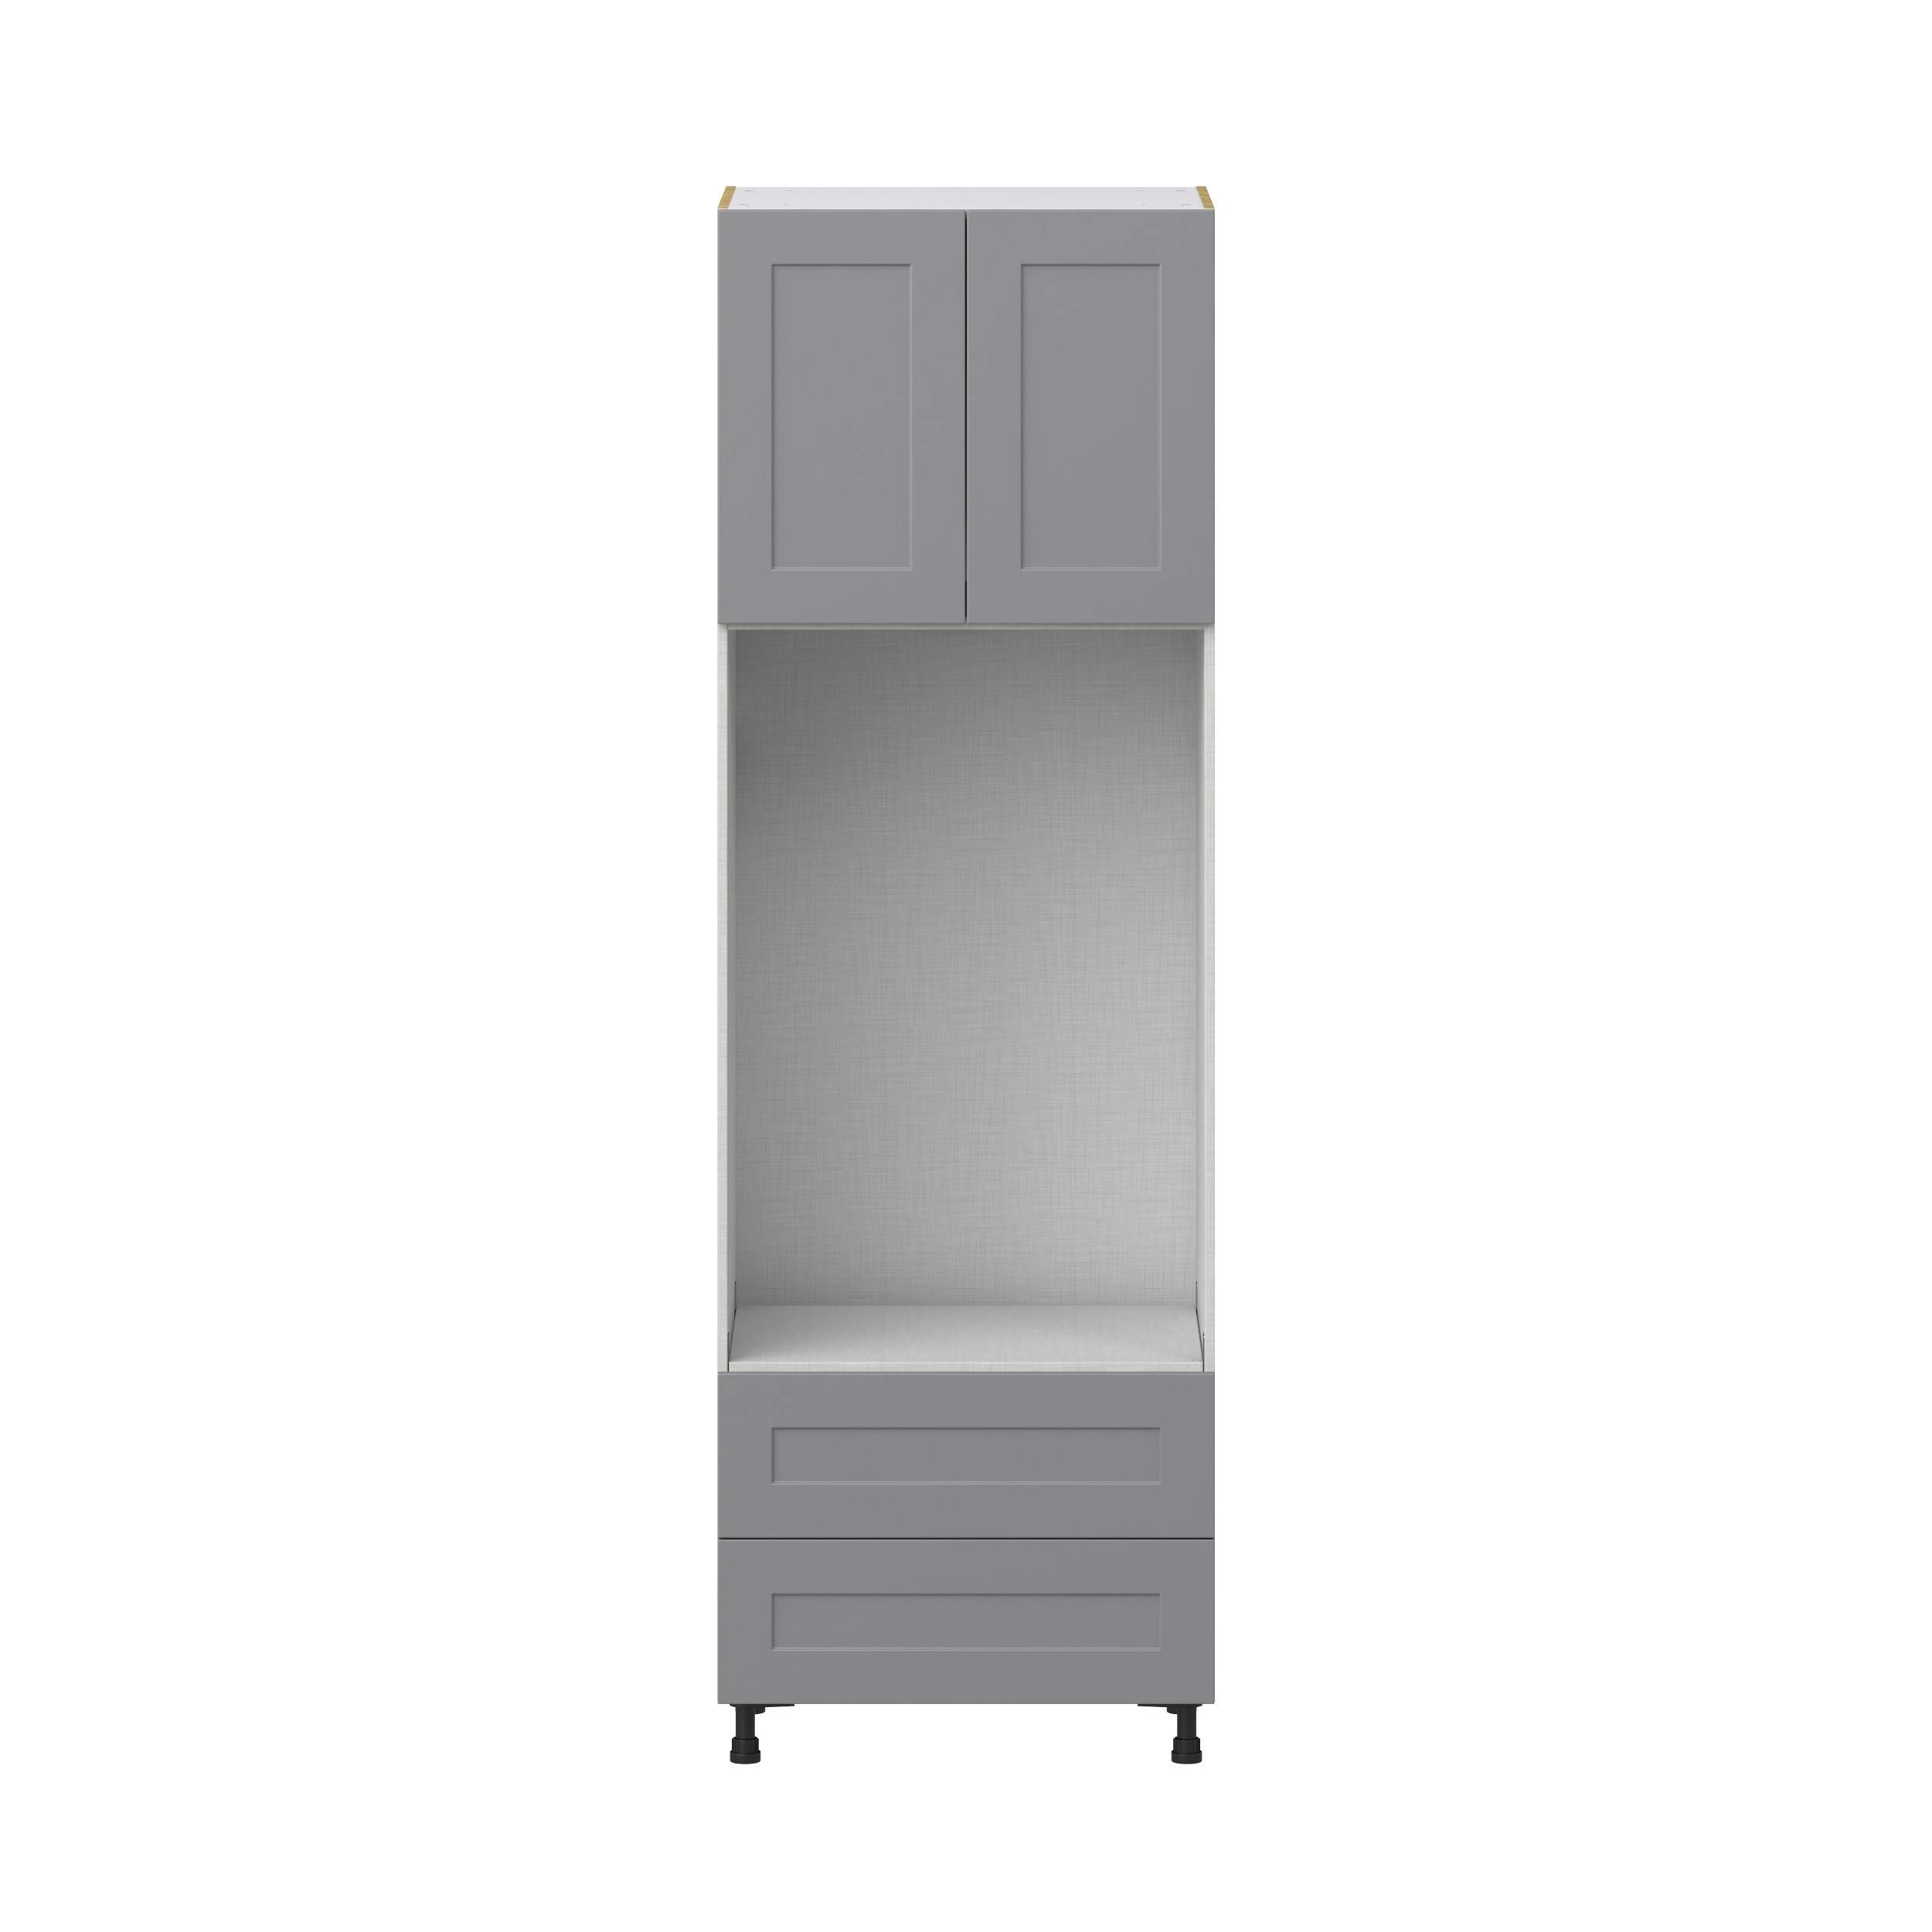 Willow Painted Slate Gray Shaker Assembled Pantry Micro/Oven Combo Cabinet with 2 Drawers (30 in. W x 94.5 in. H x 24 in. D)